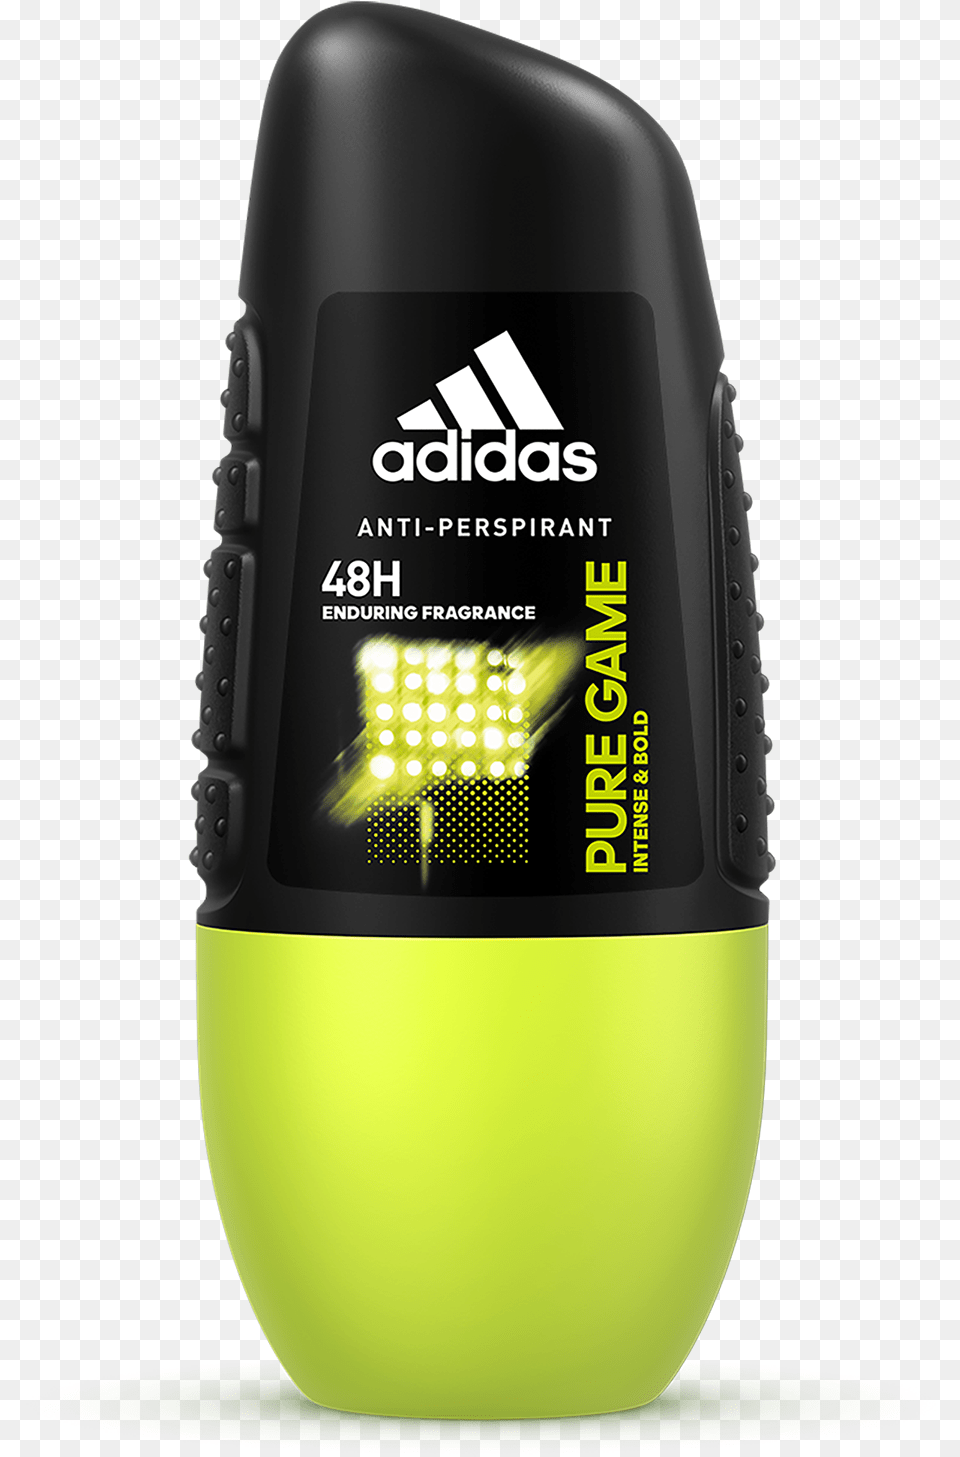 Pure Game Anti Perspirant Roll On For Him Adidas Roll On Pure Game, Ball, Sport, Tennis, Tennis Ball Png Image